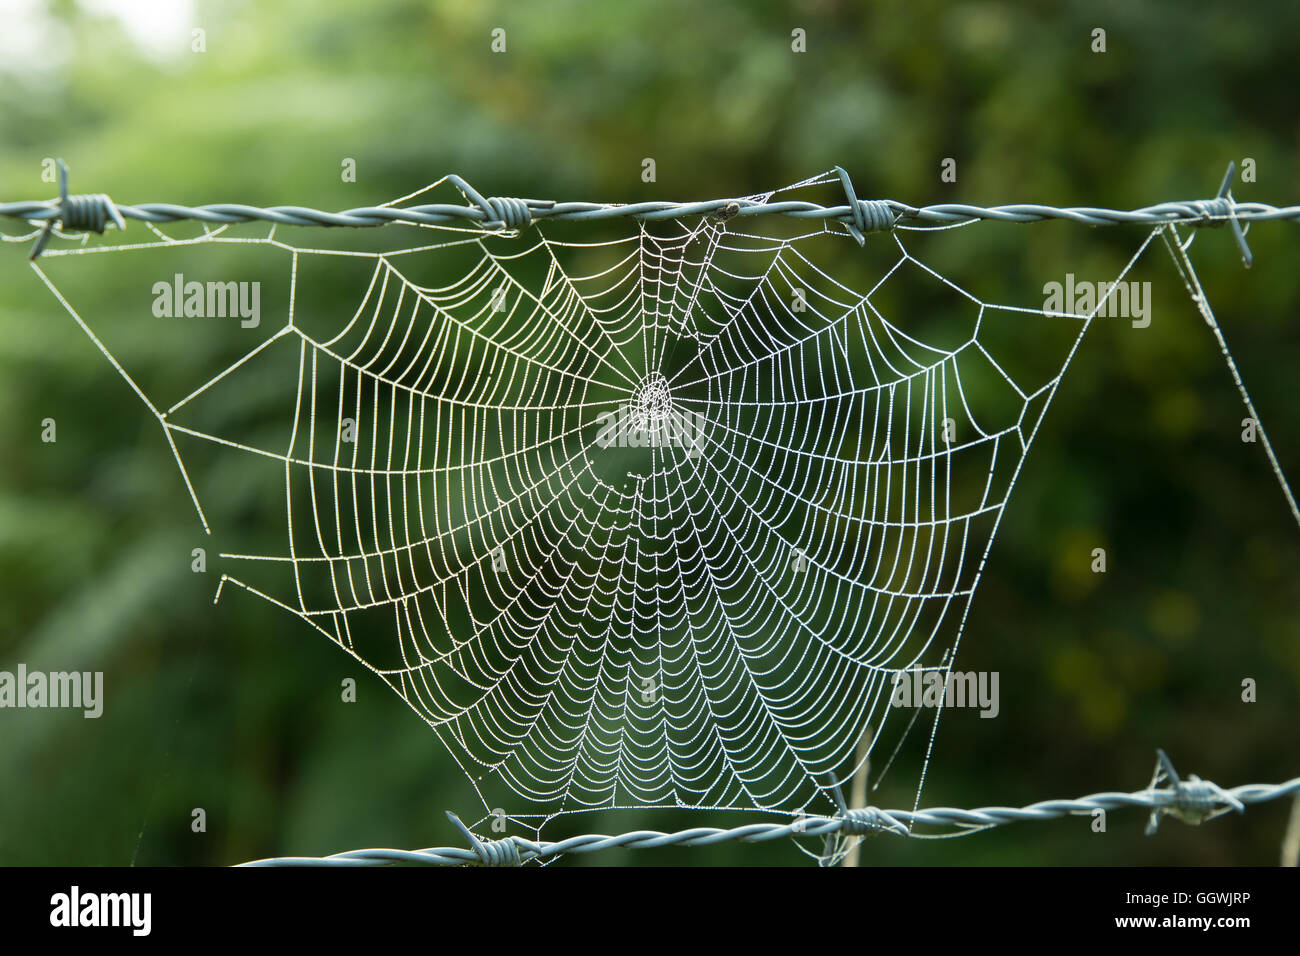 Spider cobweb on barbed wire, with morning dew. Stock Photo